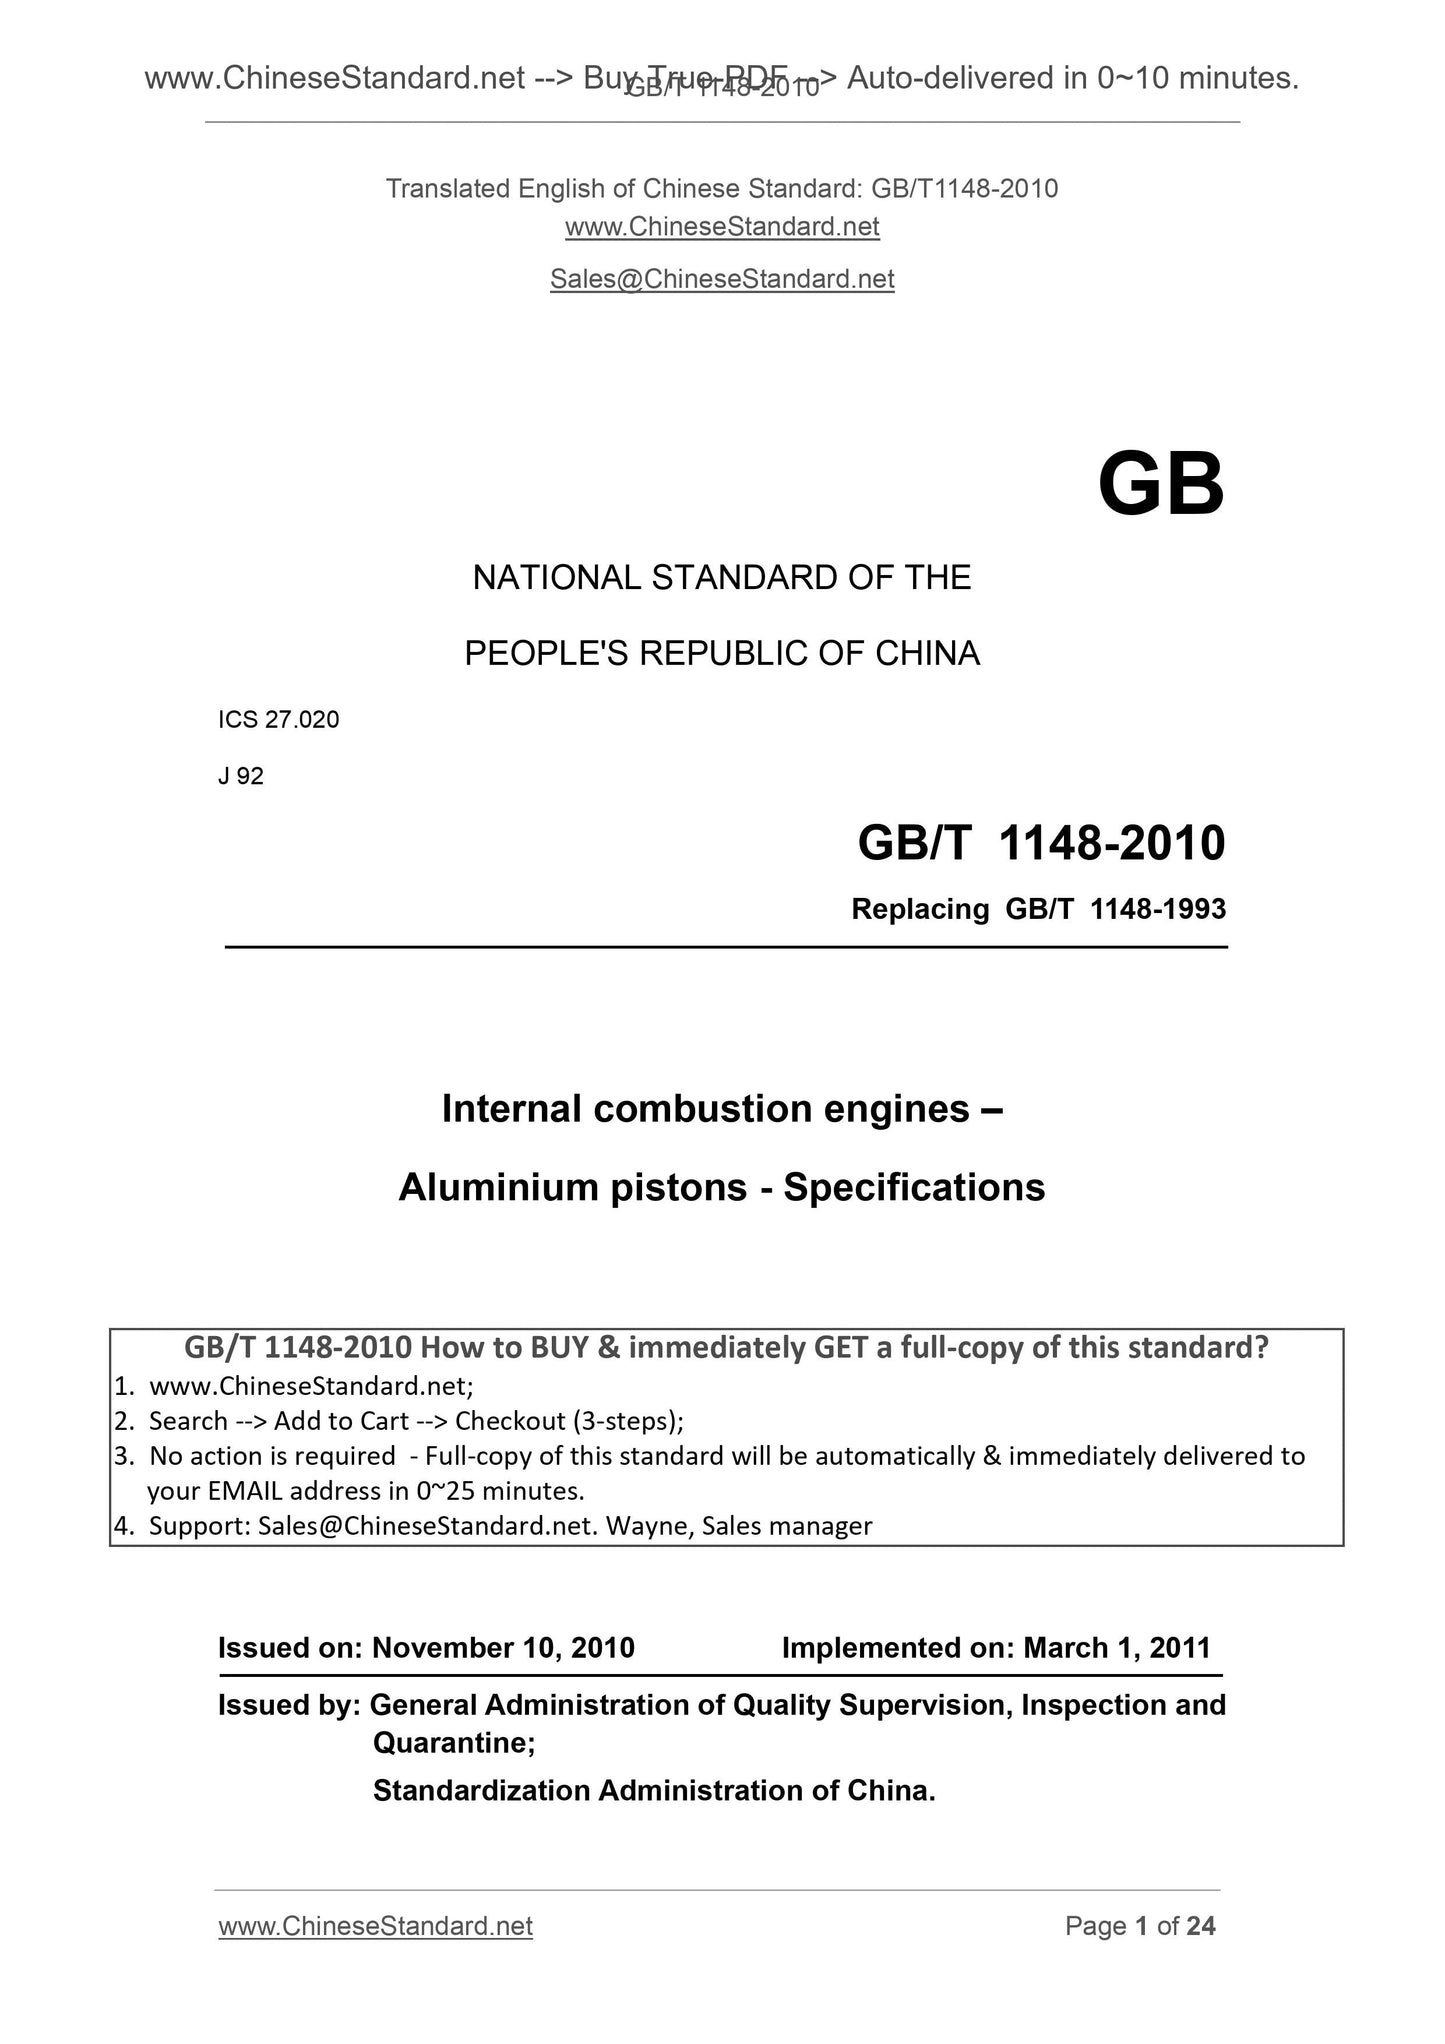 GB/T 1148-2010 Page 1